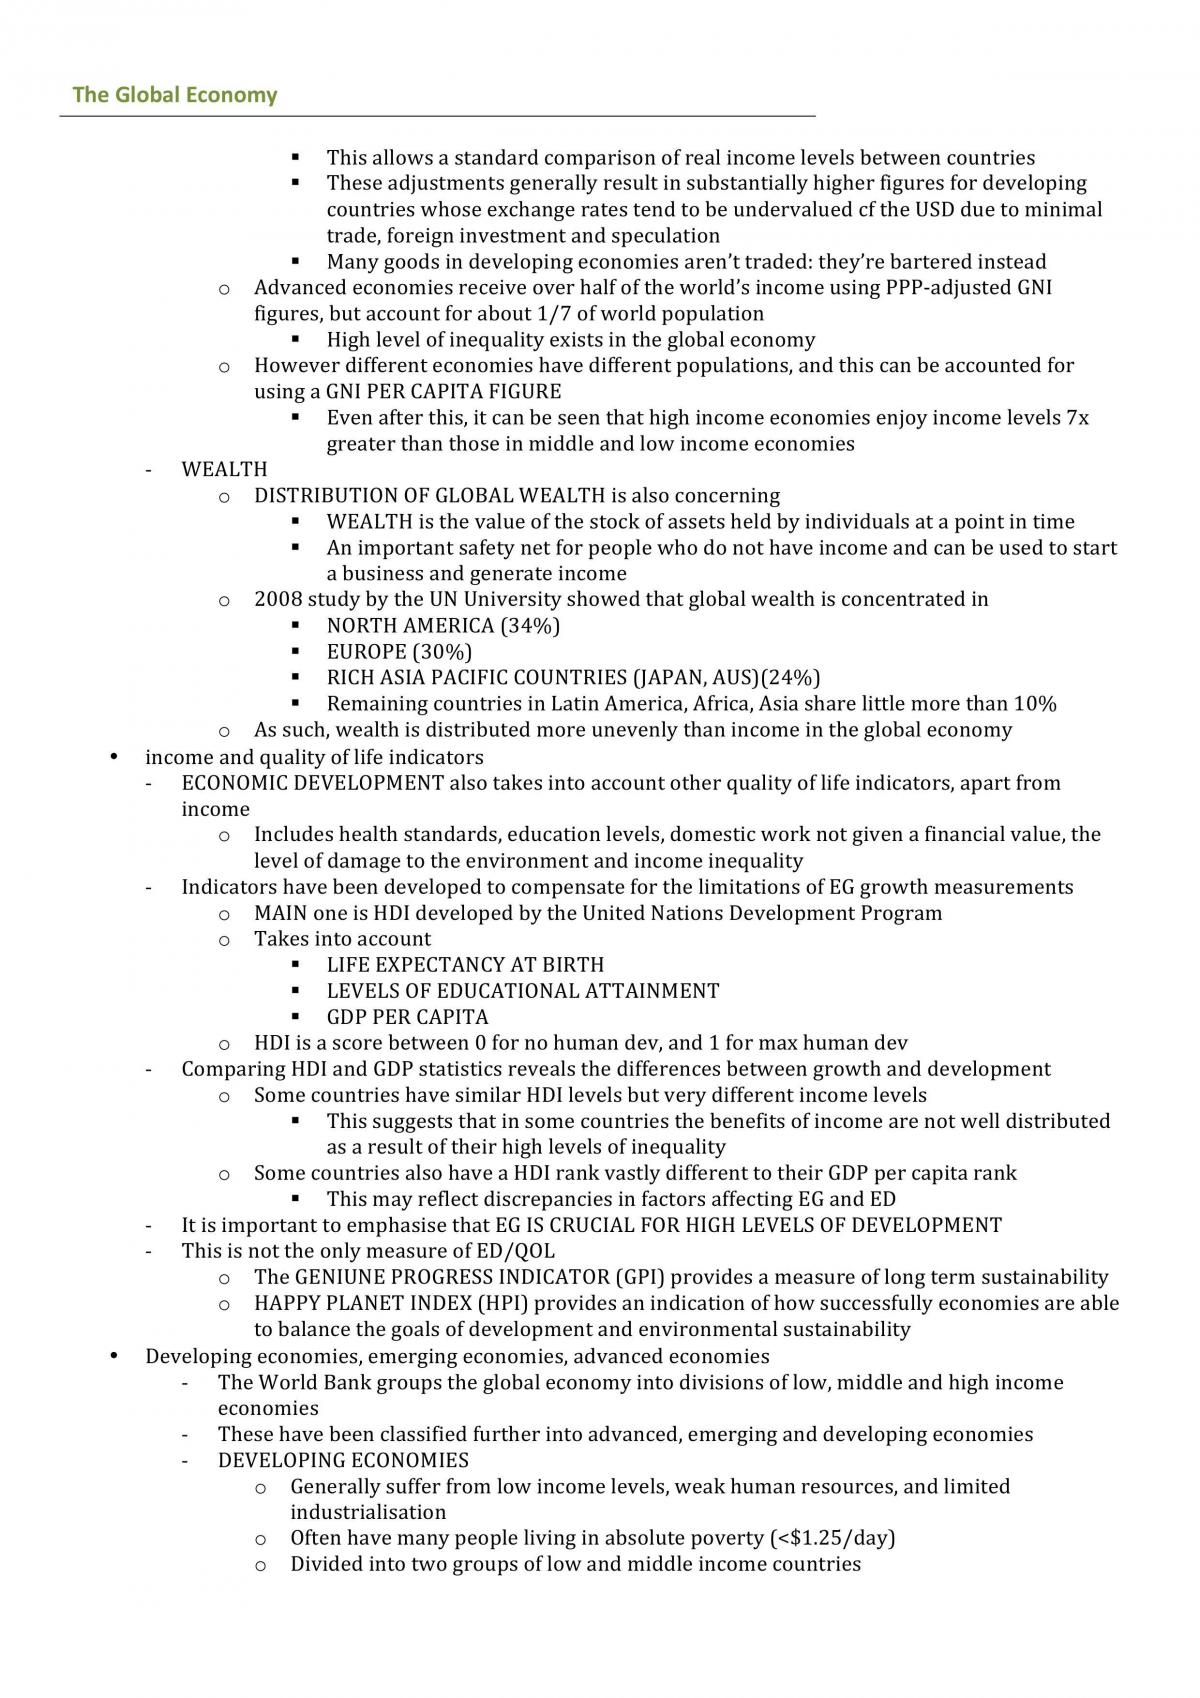 The Global Economy - Topic Notes - Page 17